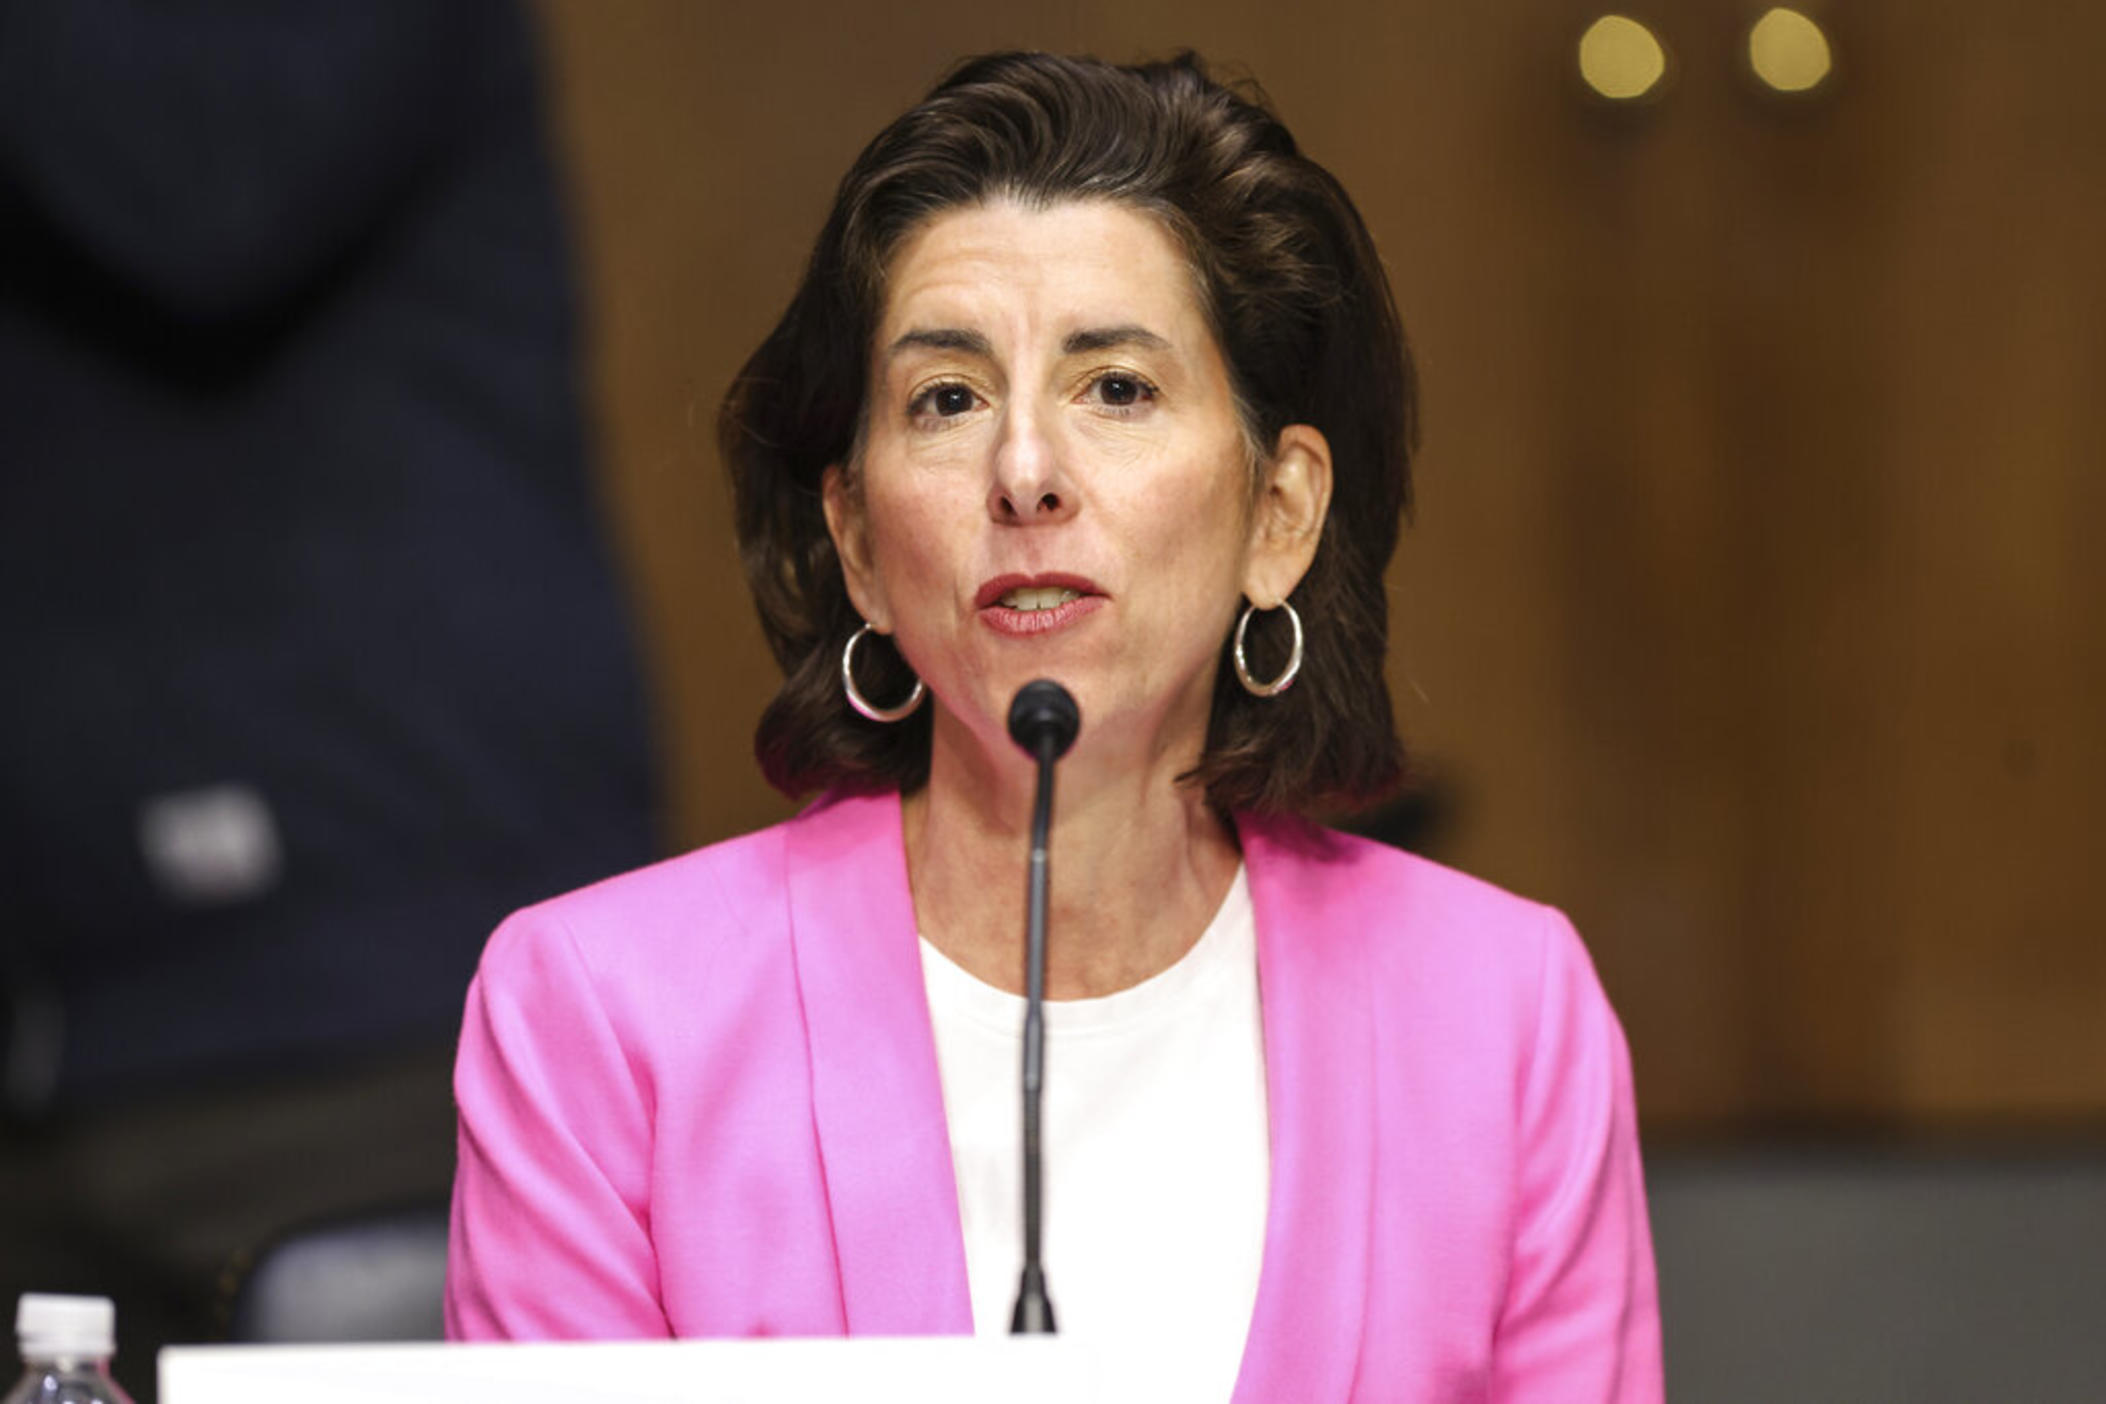 Commerce Secretary Gina Raimondo testifies during a Senate Appropriations Committee hearing on Capitol Hill, Tuesday, April 20, 2021 in Washington.